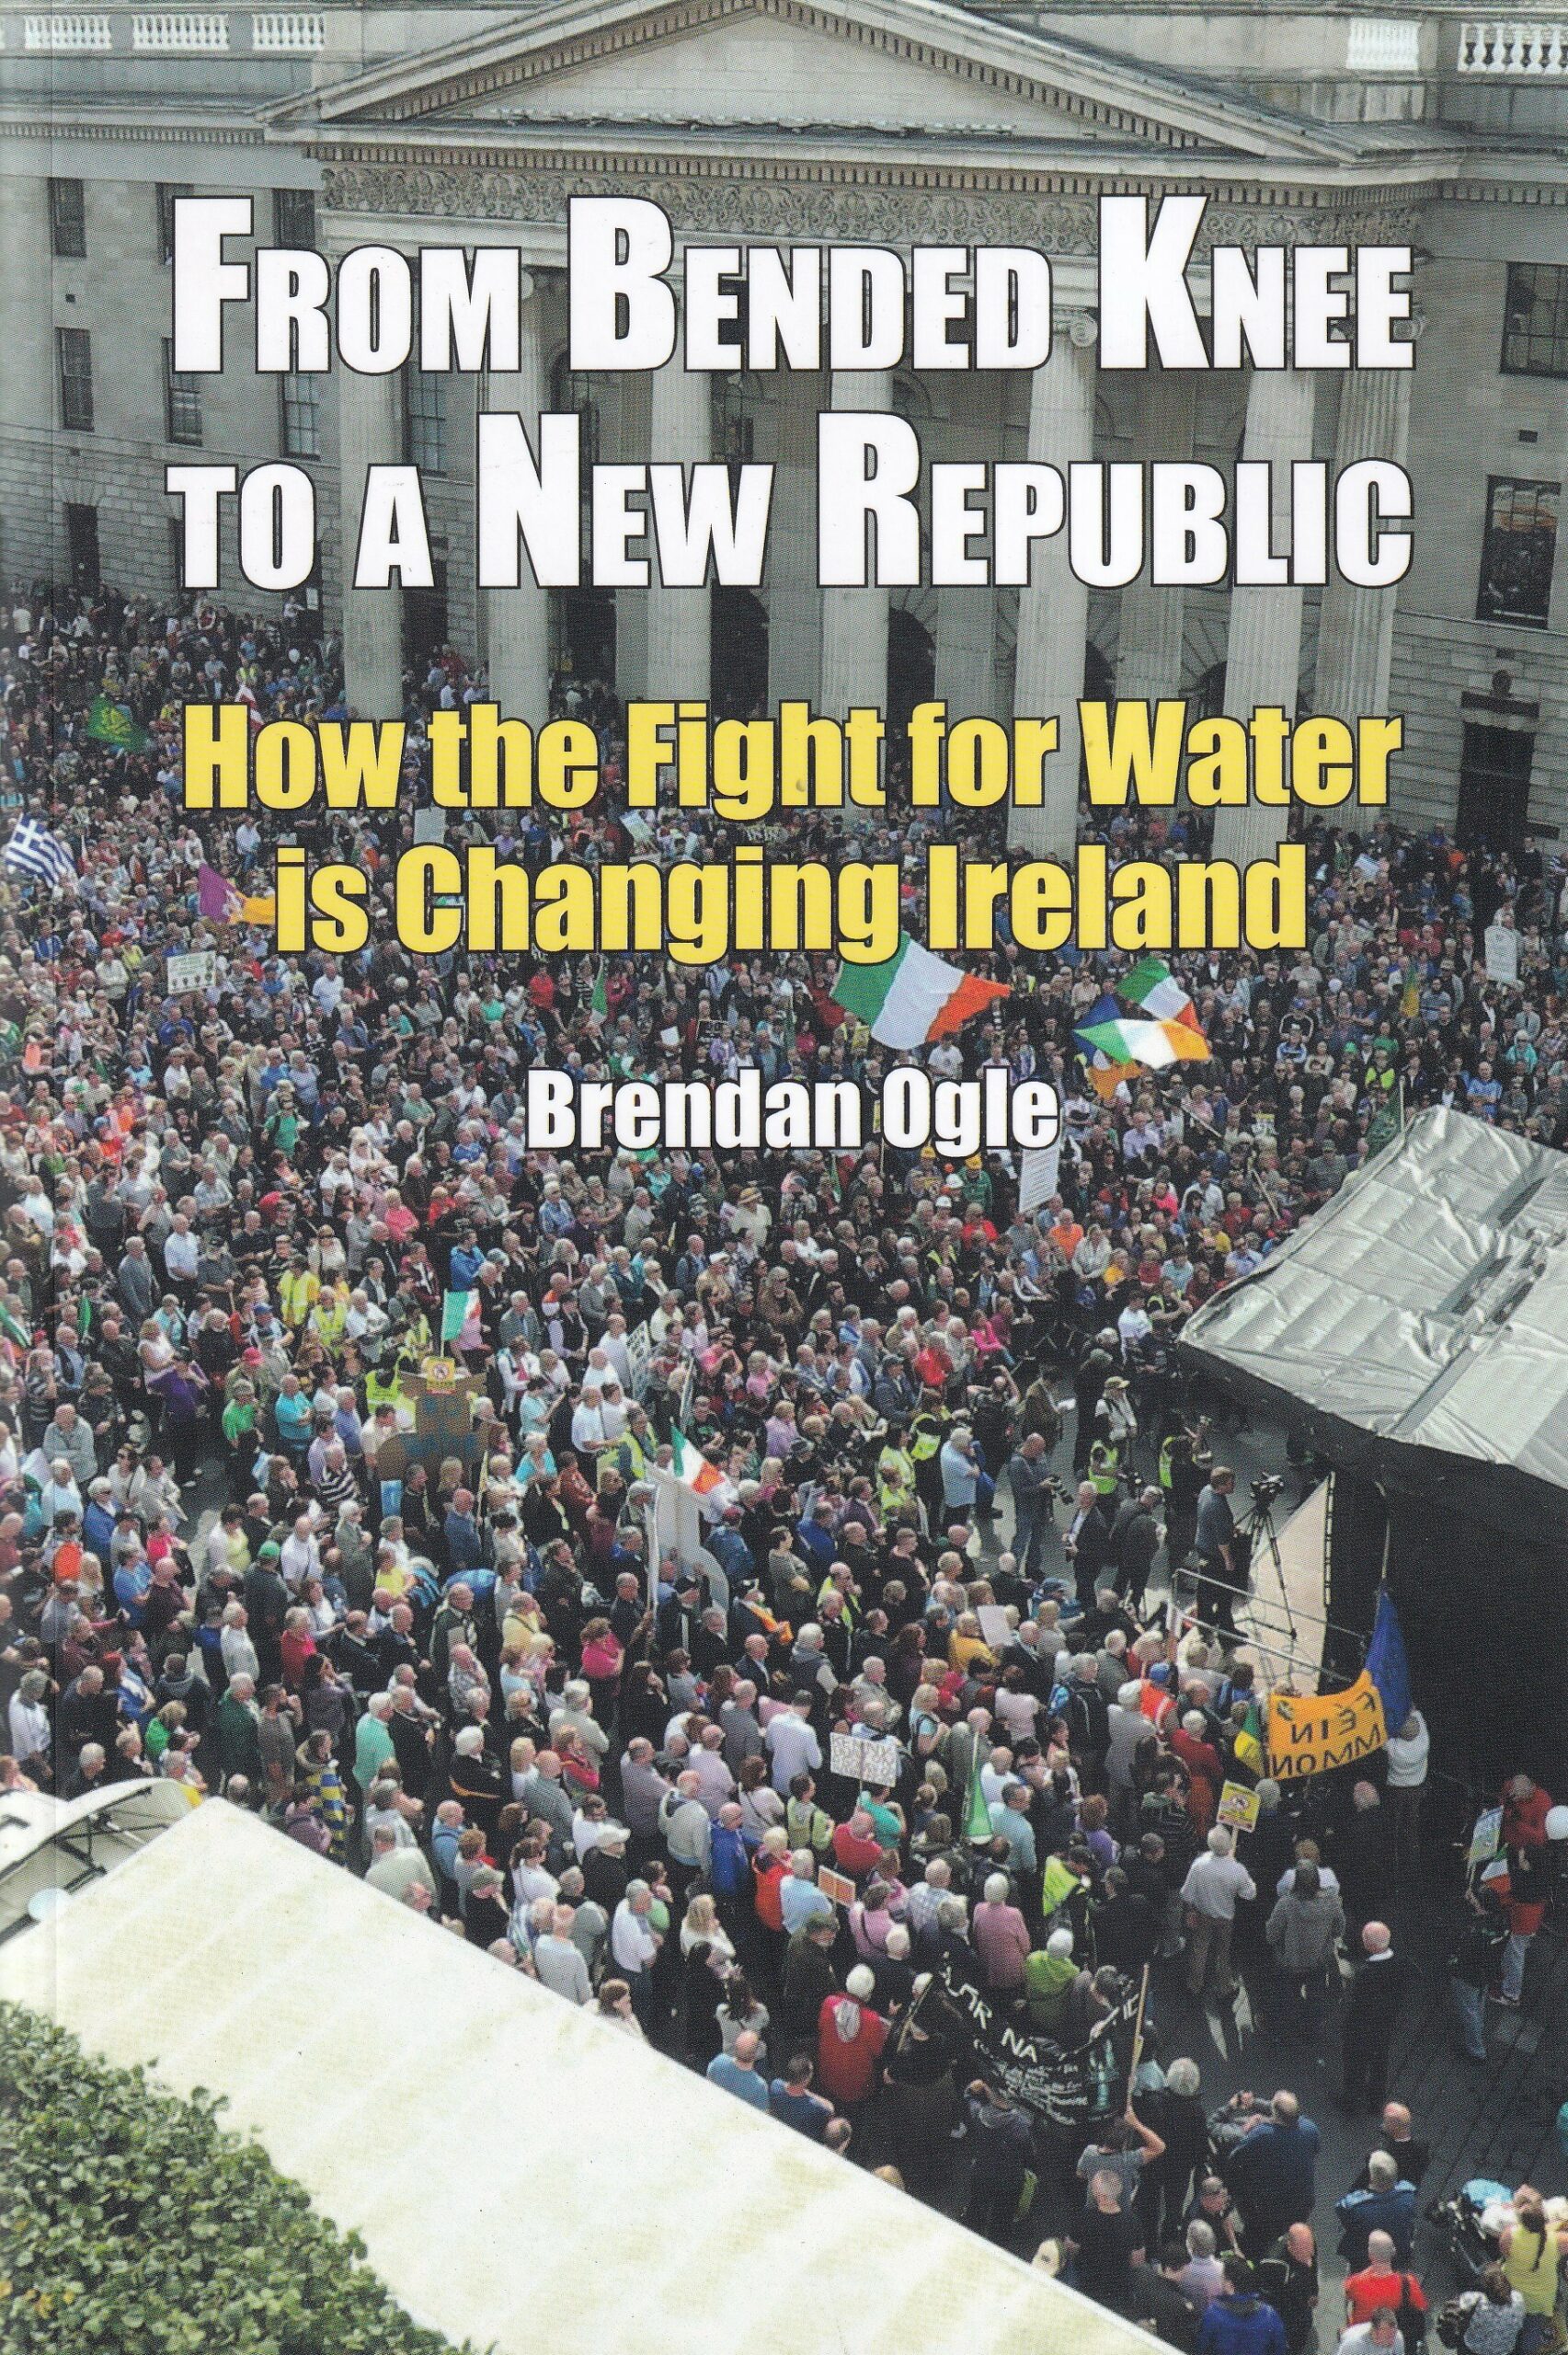 From Bended Knee to a New Republic: How the Fight for Water is Changing Ireland | Brendan Ogle | Charlie Byrne's